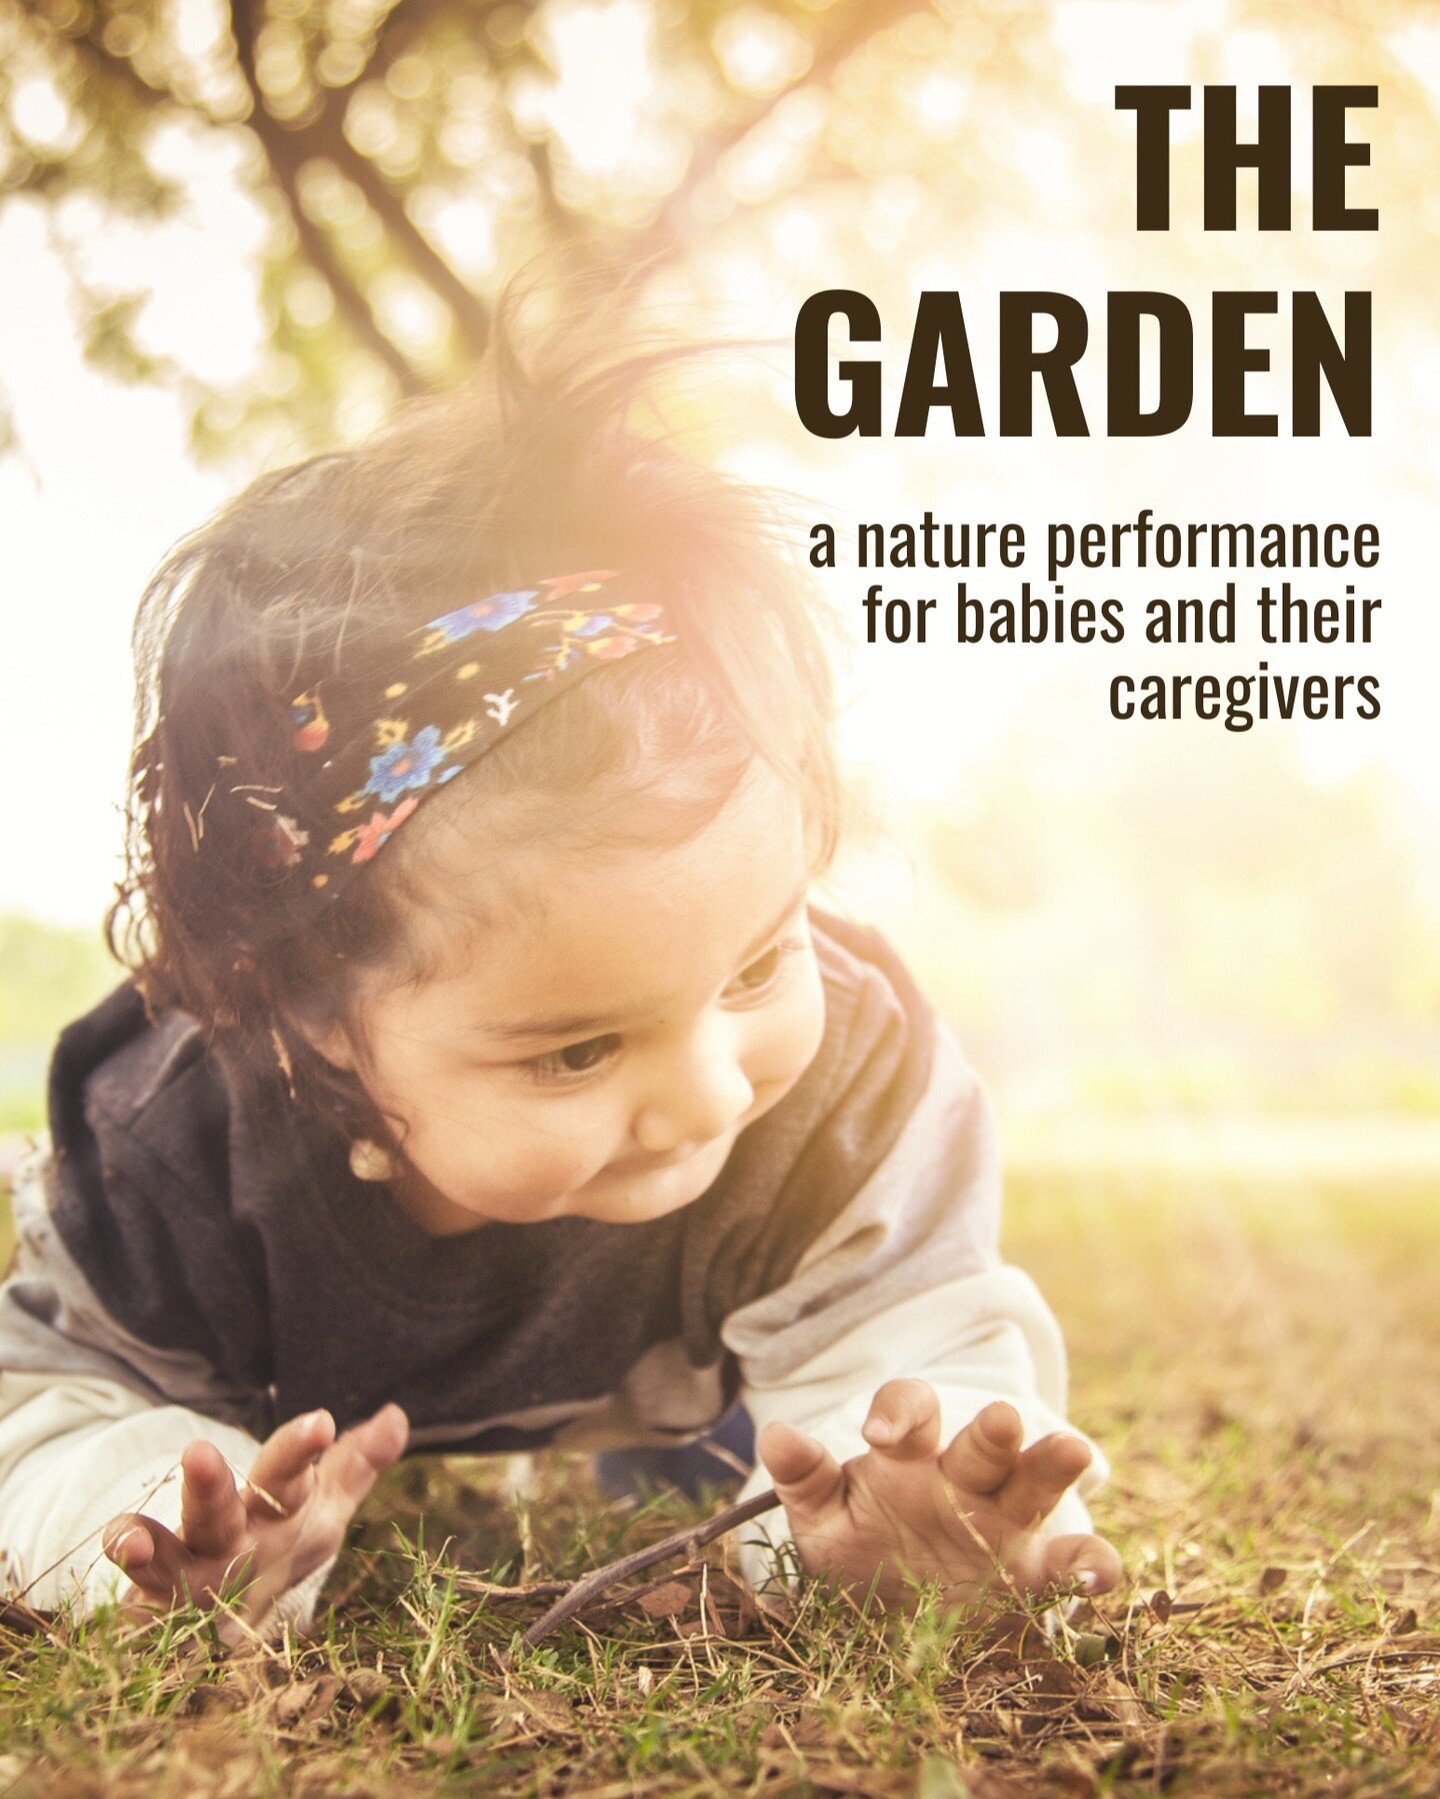 Hello there, friends. Tuning in to social media again to share this beautiful, truly special project I've been involved with as a nature education consultant. 

&quot;The Garden&quot; is a 45-minute interactive, meditative performance for babies and 